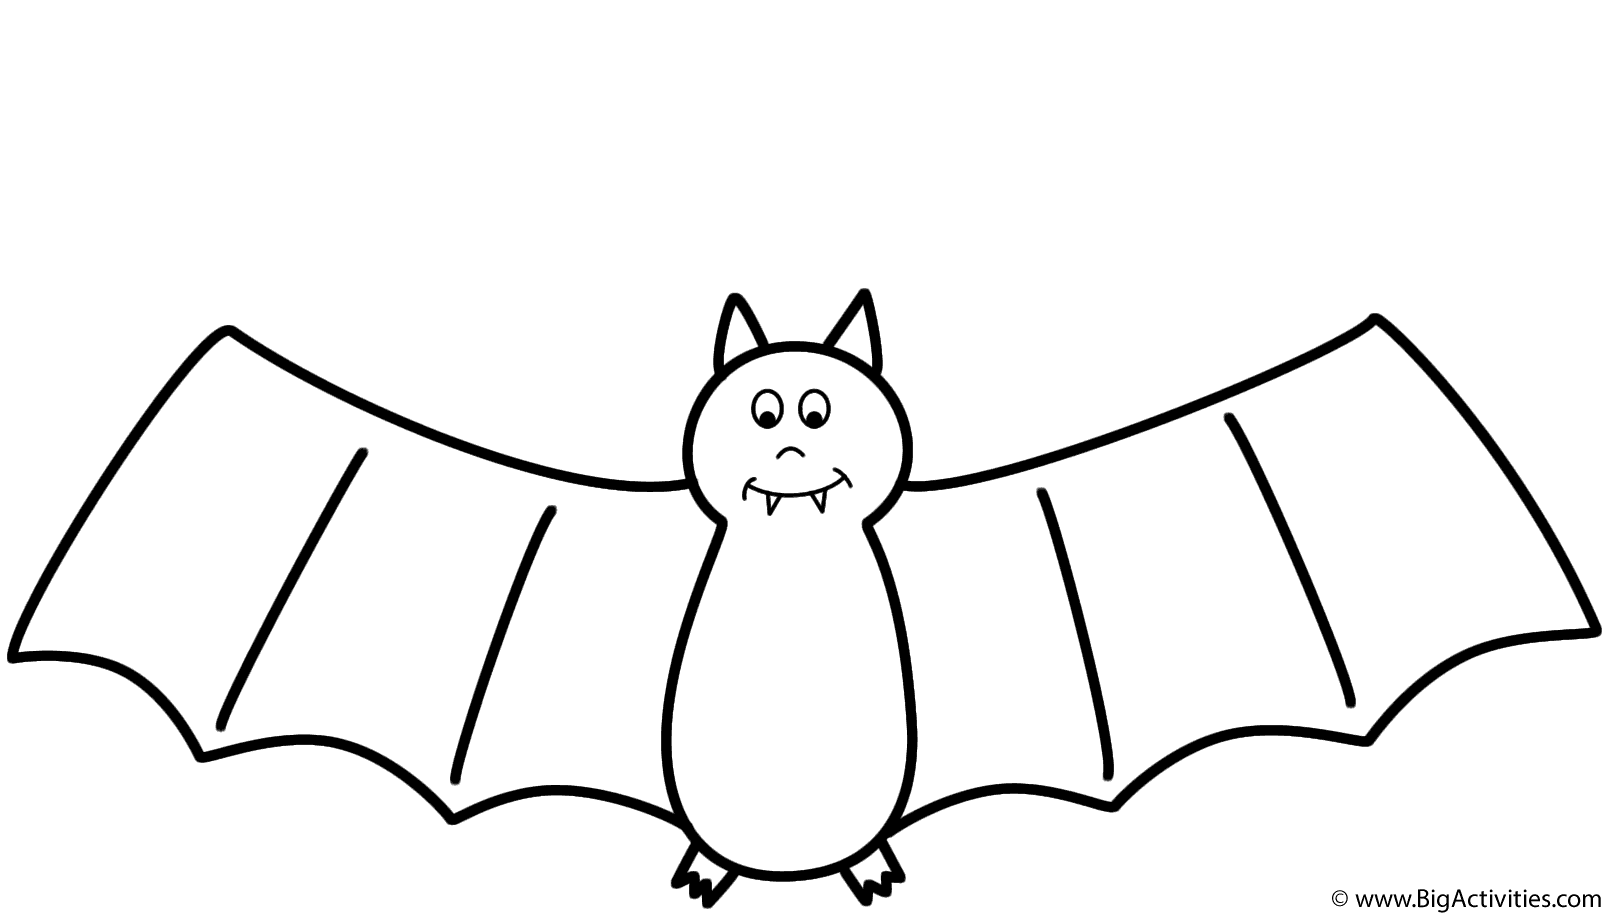 Bat - Coloring Page (Halloween)